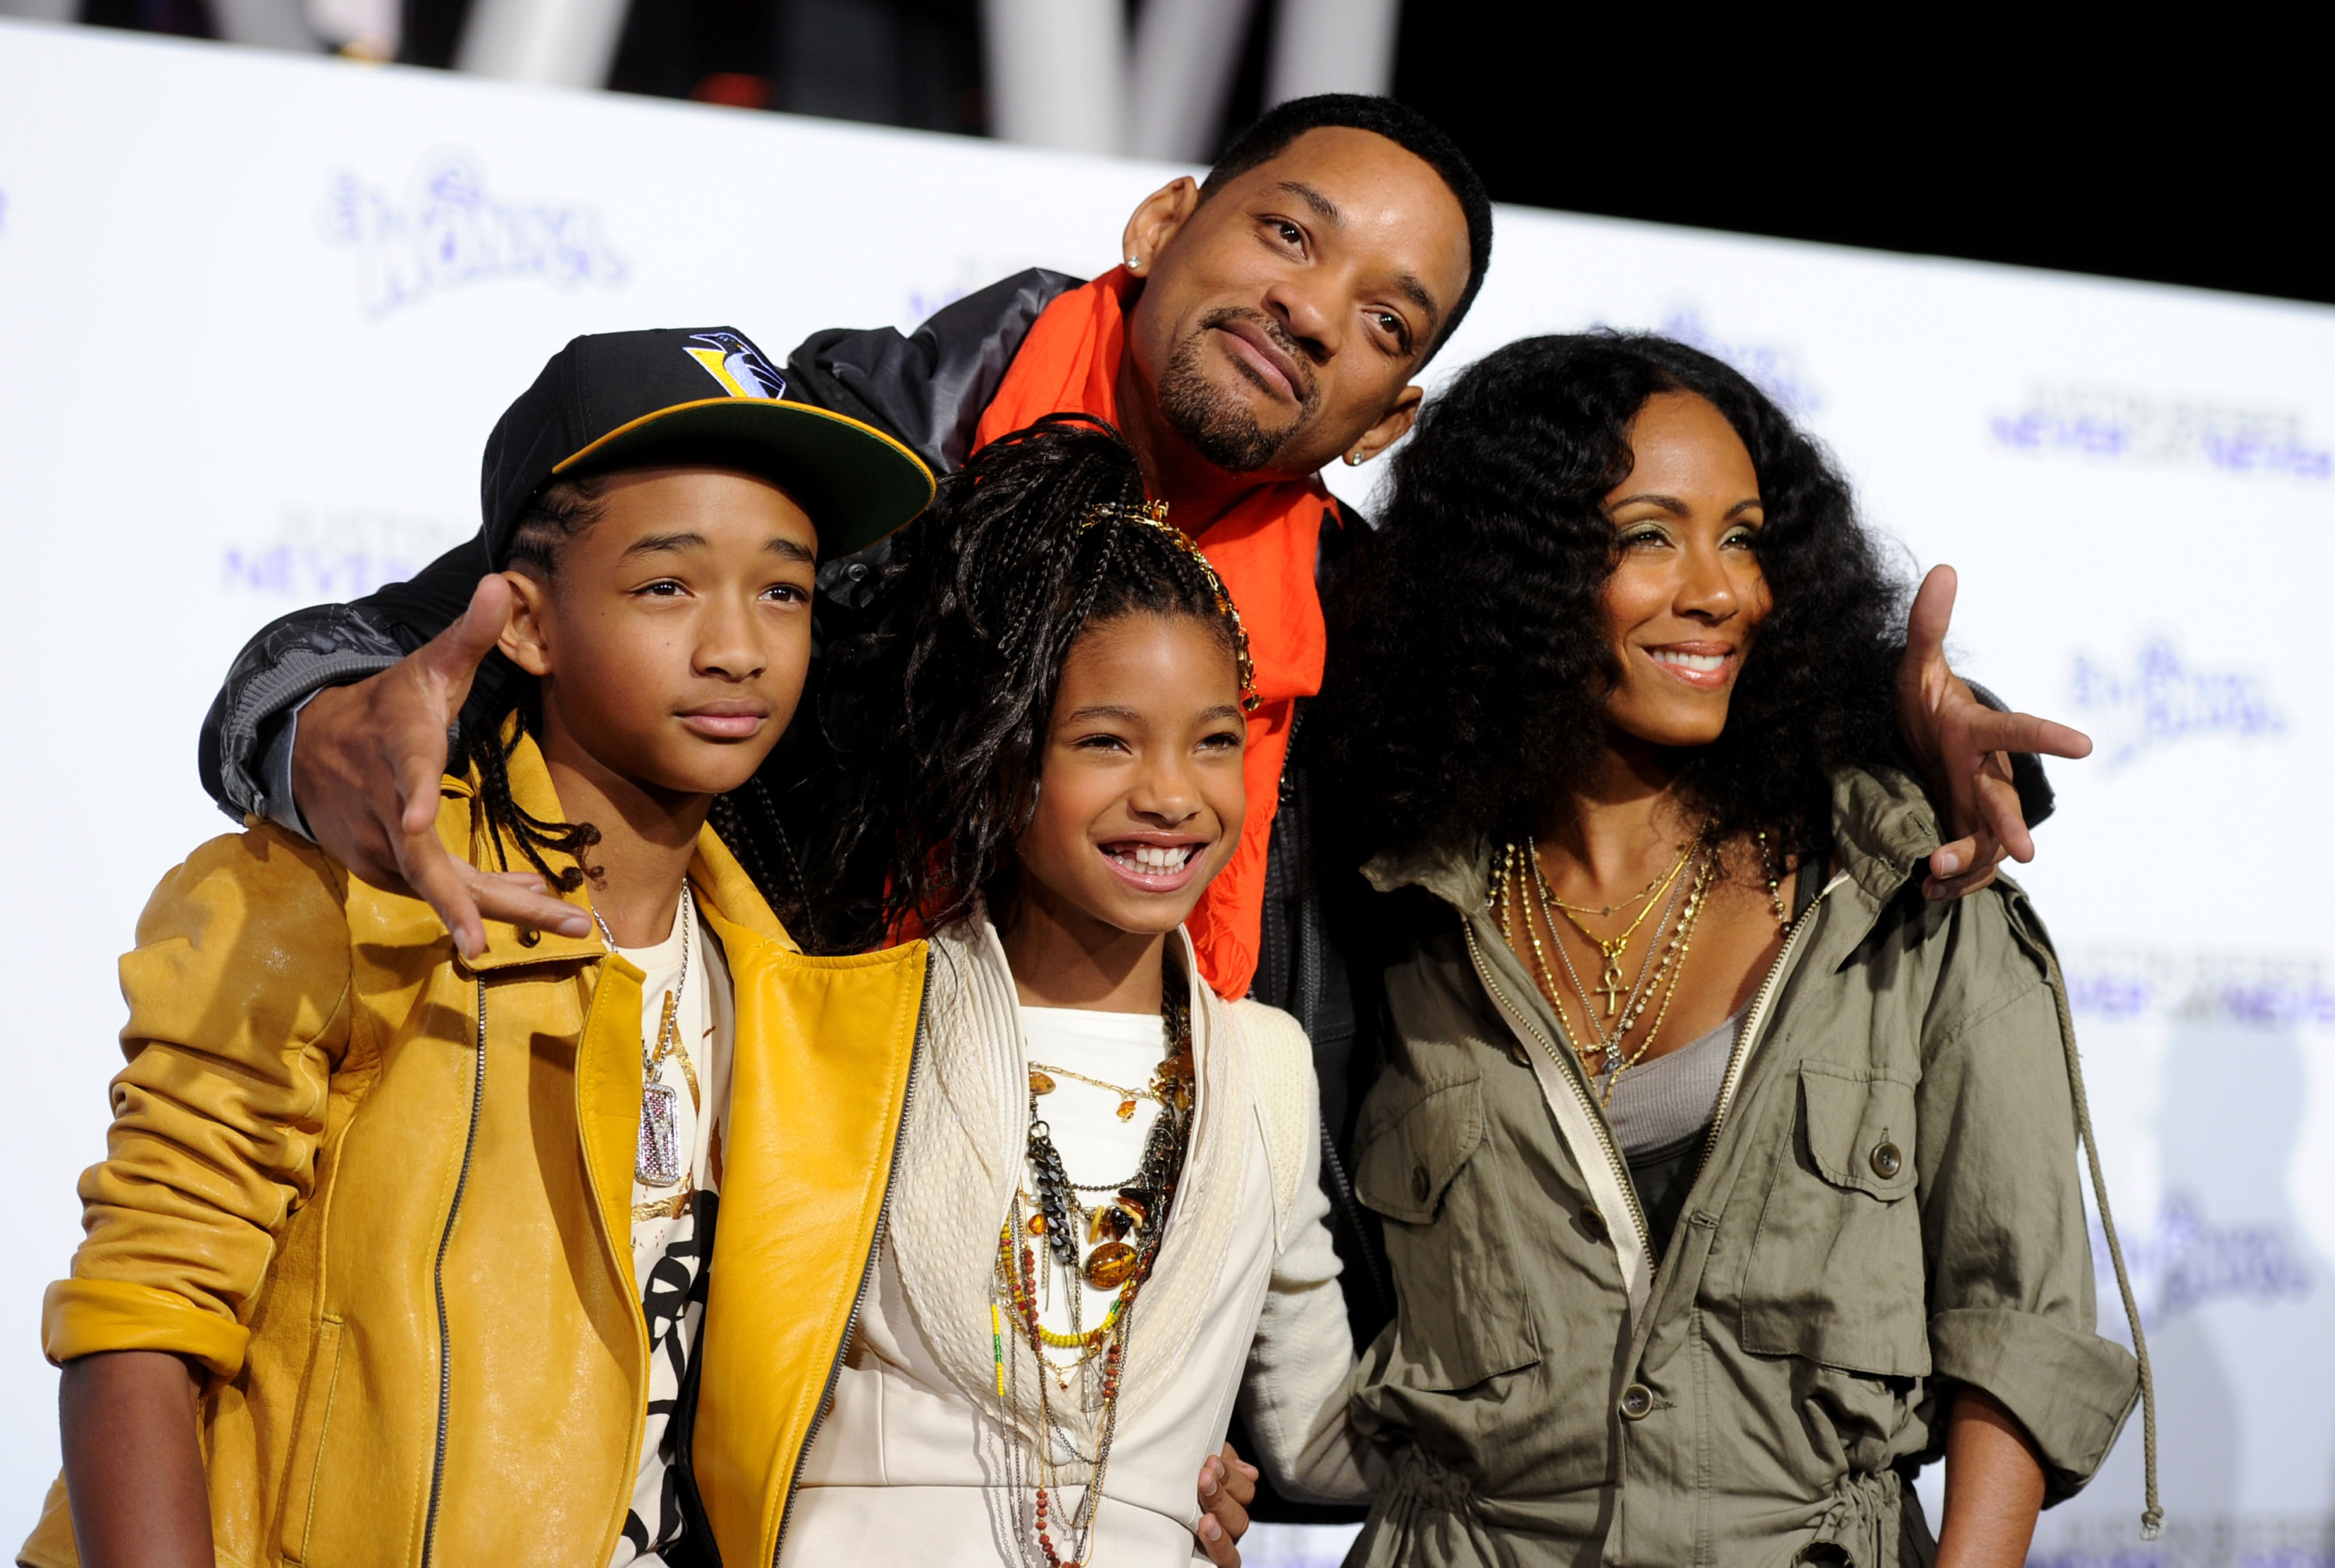 (L-R) Jaden Smith, Willow Smith, Will Smith, and Jada Pinkett Smith arrive at the premiere of Paramount Pictures' "Justin Bieber: Never Say Never" held at Nokia Theater L.A. Live, on February 8, 2011, in Los Angeles, California. | Source: Getty Images